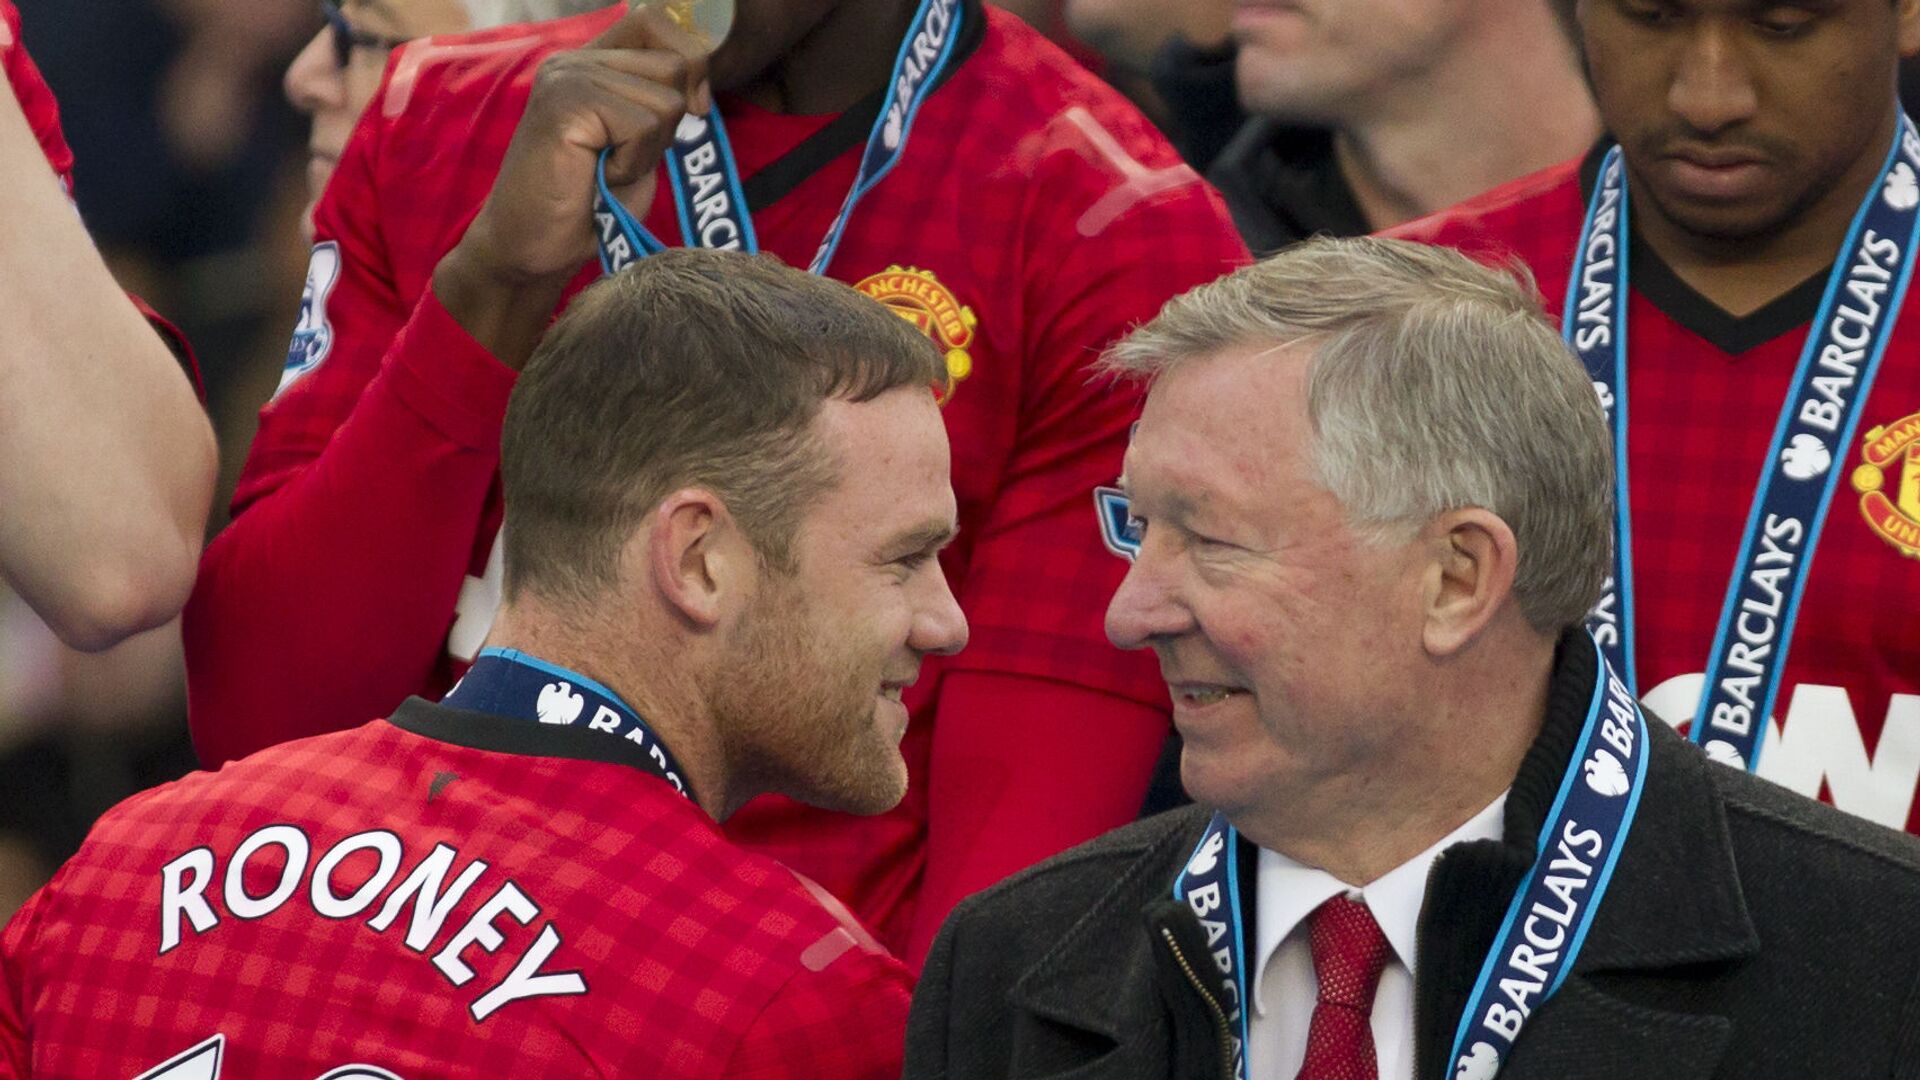 Manchester United's manager Sir Alex Ferguson, right, speaks to striker Wayne Rooney after his last home game in charge of the club, their English Premier League soccer match against Swansea, at Old Trafford Stadium, Manchester, England, Sunday May 12, 2013 - اسپوتنیک افغانستان  , 1920, 31.12.2021